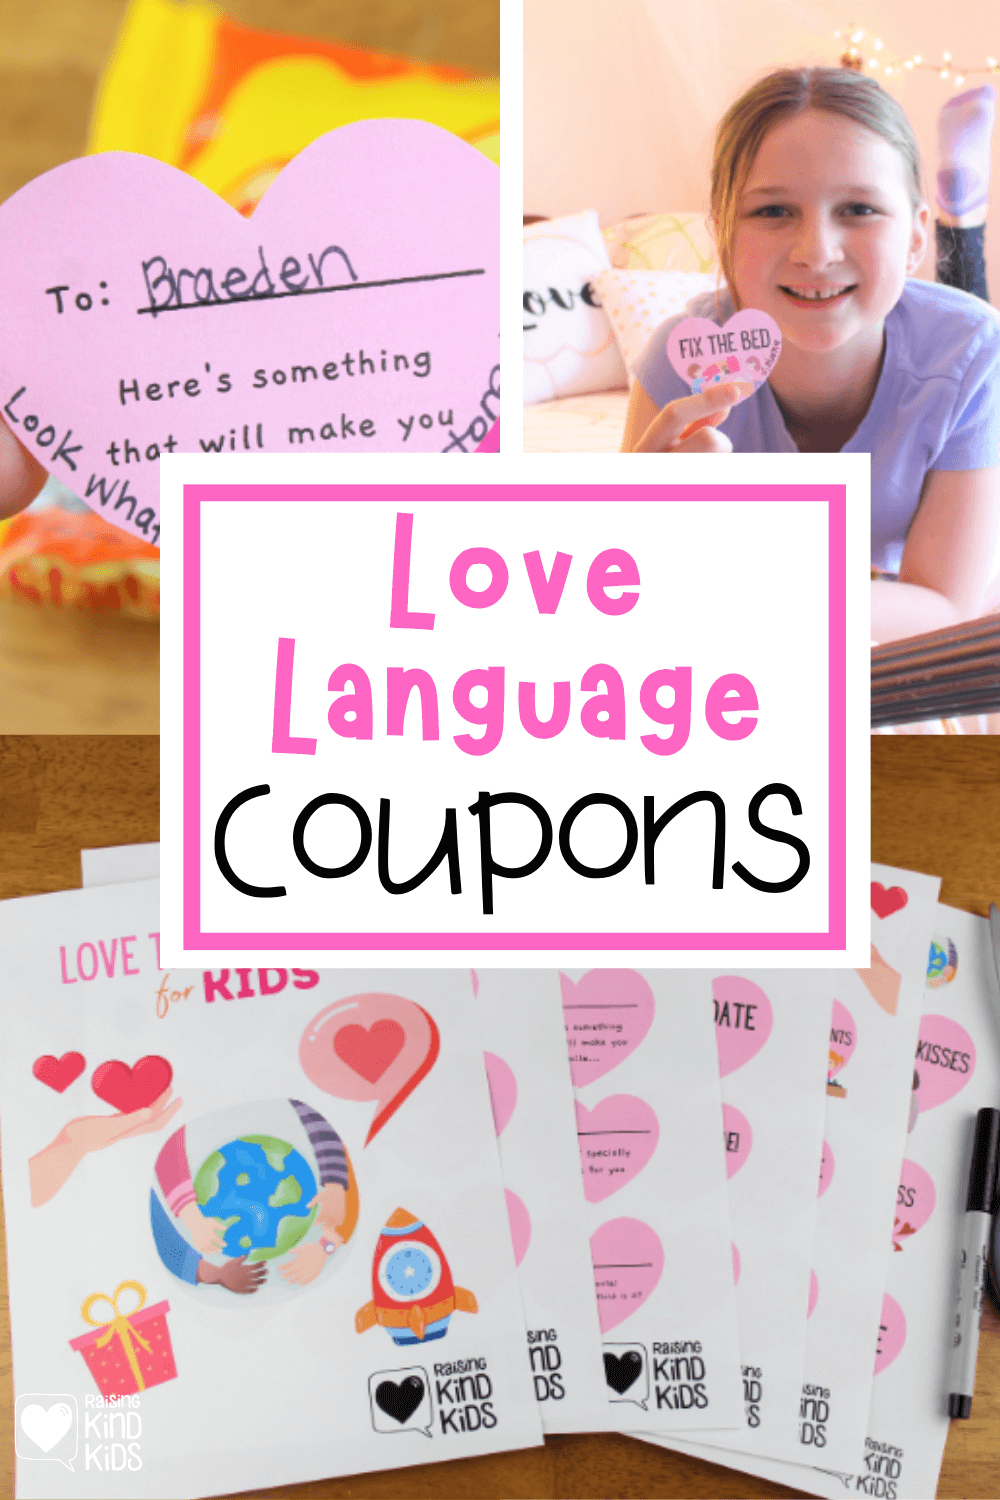 Use these Love Language Coupons for each Love Language to connect with your kids in meaningful ways.